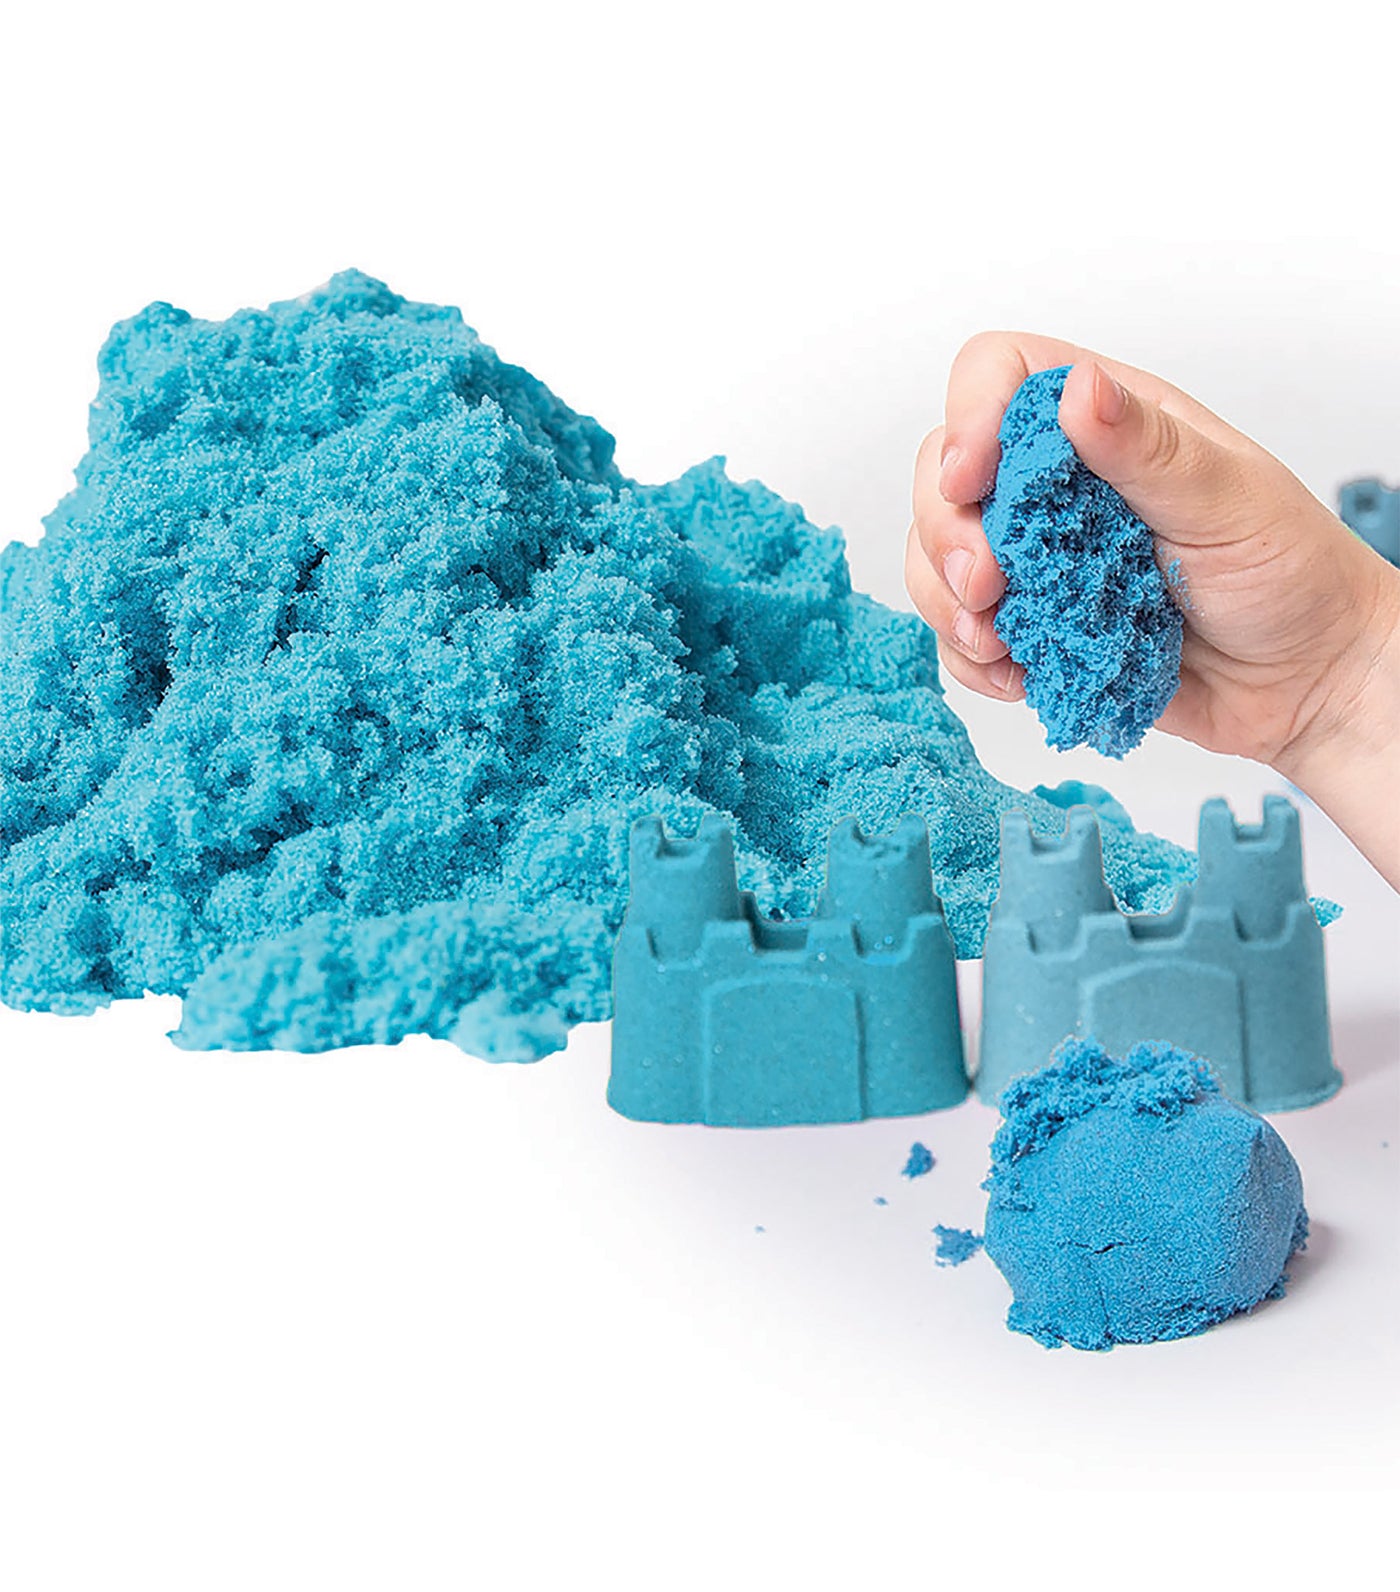 Silly Scents Sand Castle Tub Blueberry